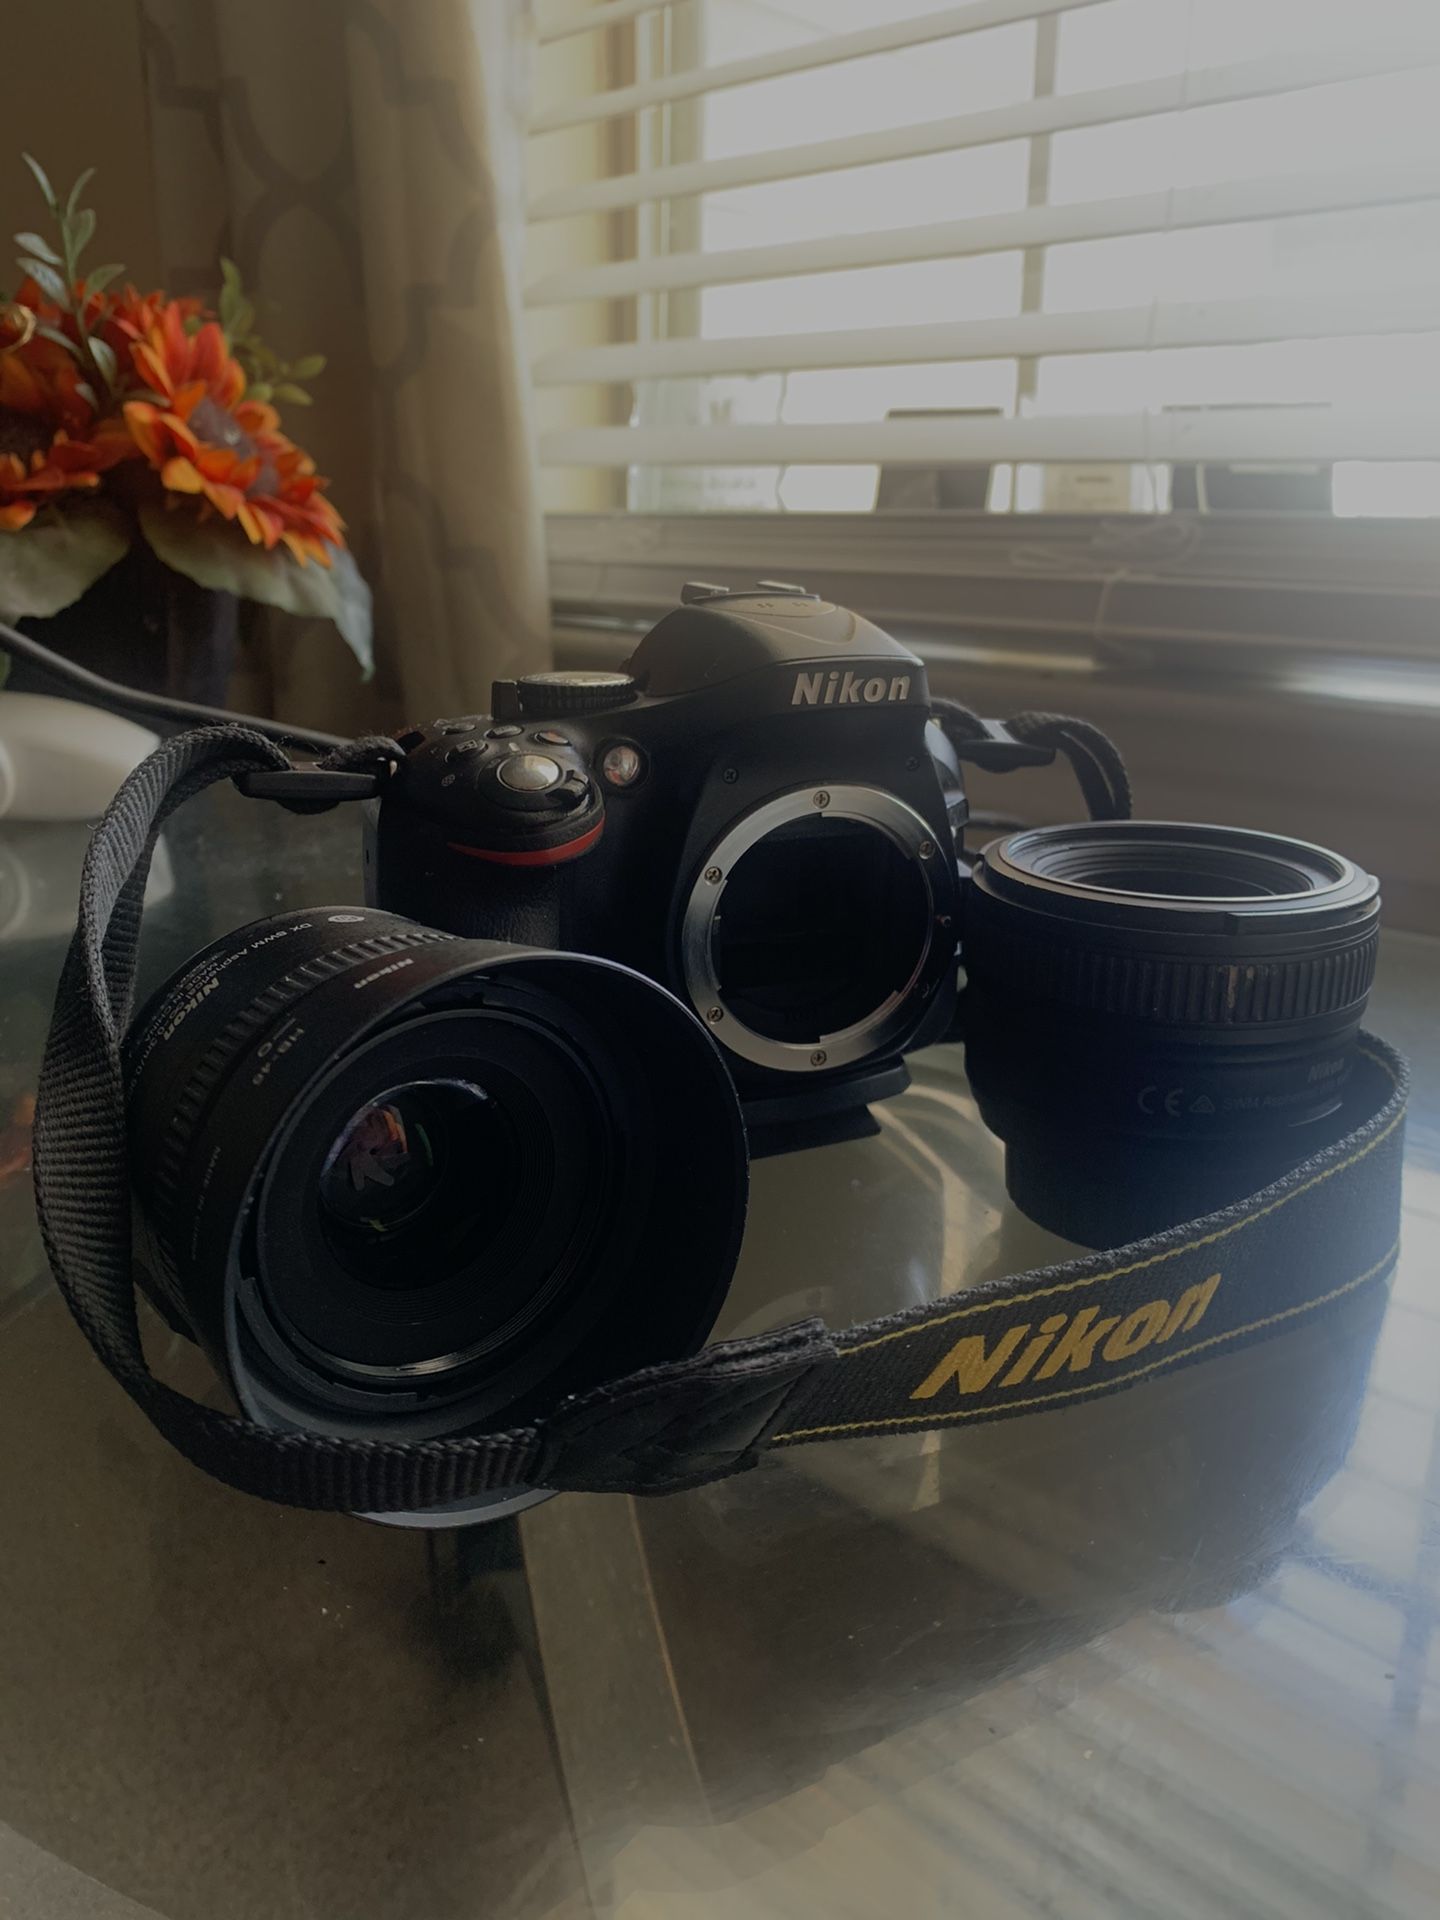 Nikon D5200 with 35mm1.8 and 50mm 1.8